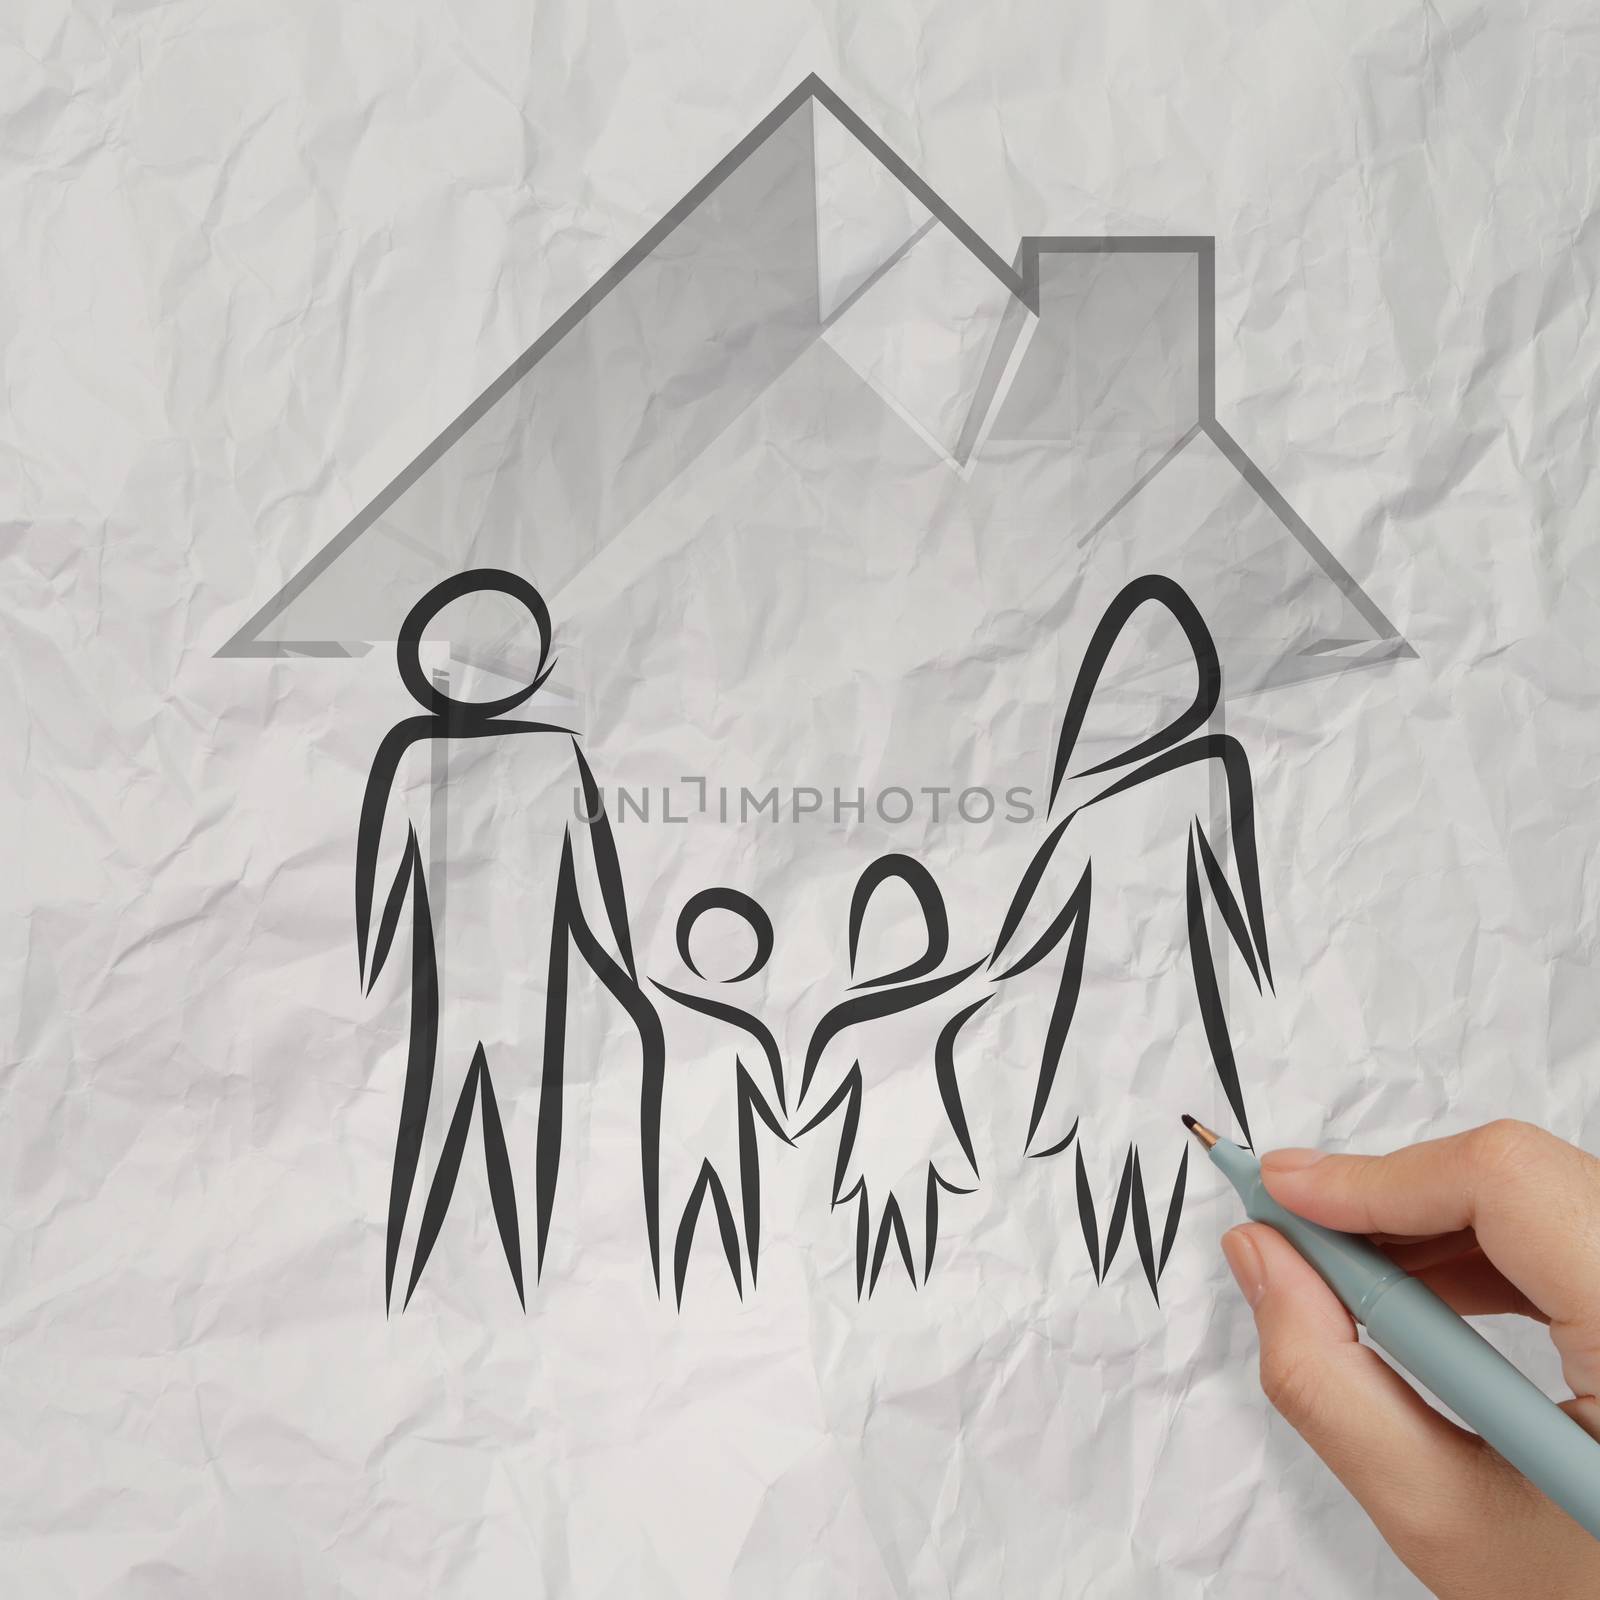 hand drawing 3d house wtih family icon on crumpled paper background as insurance concept